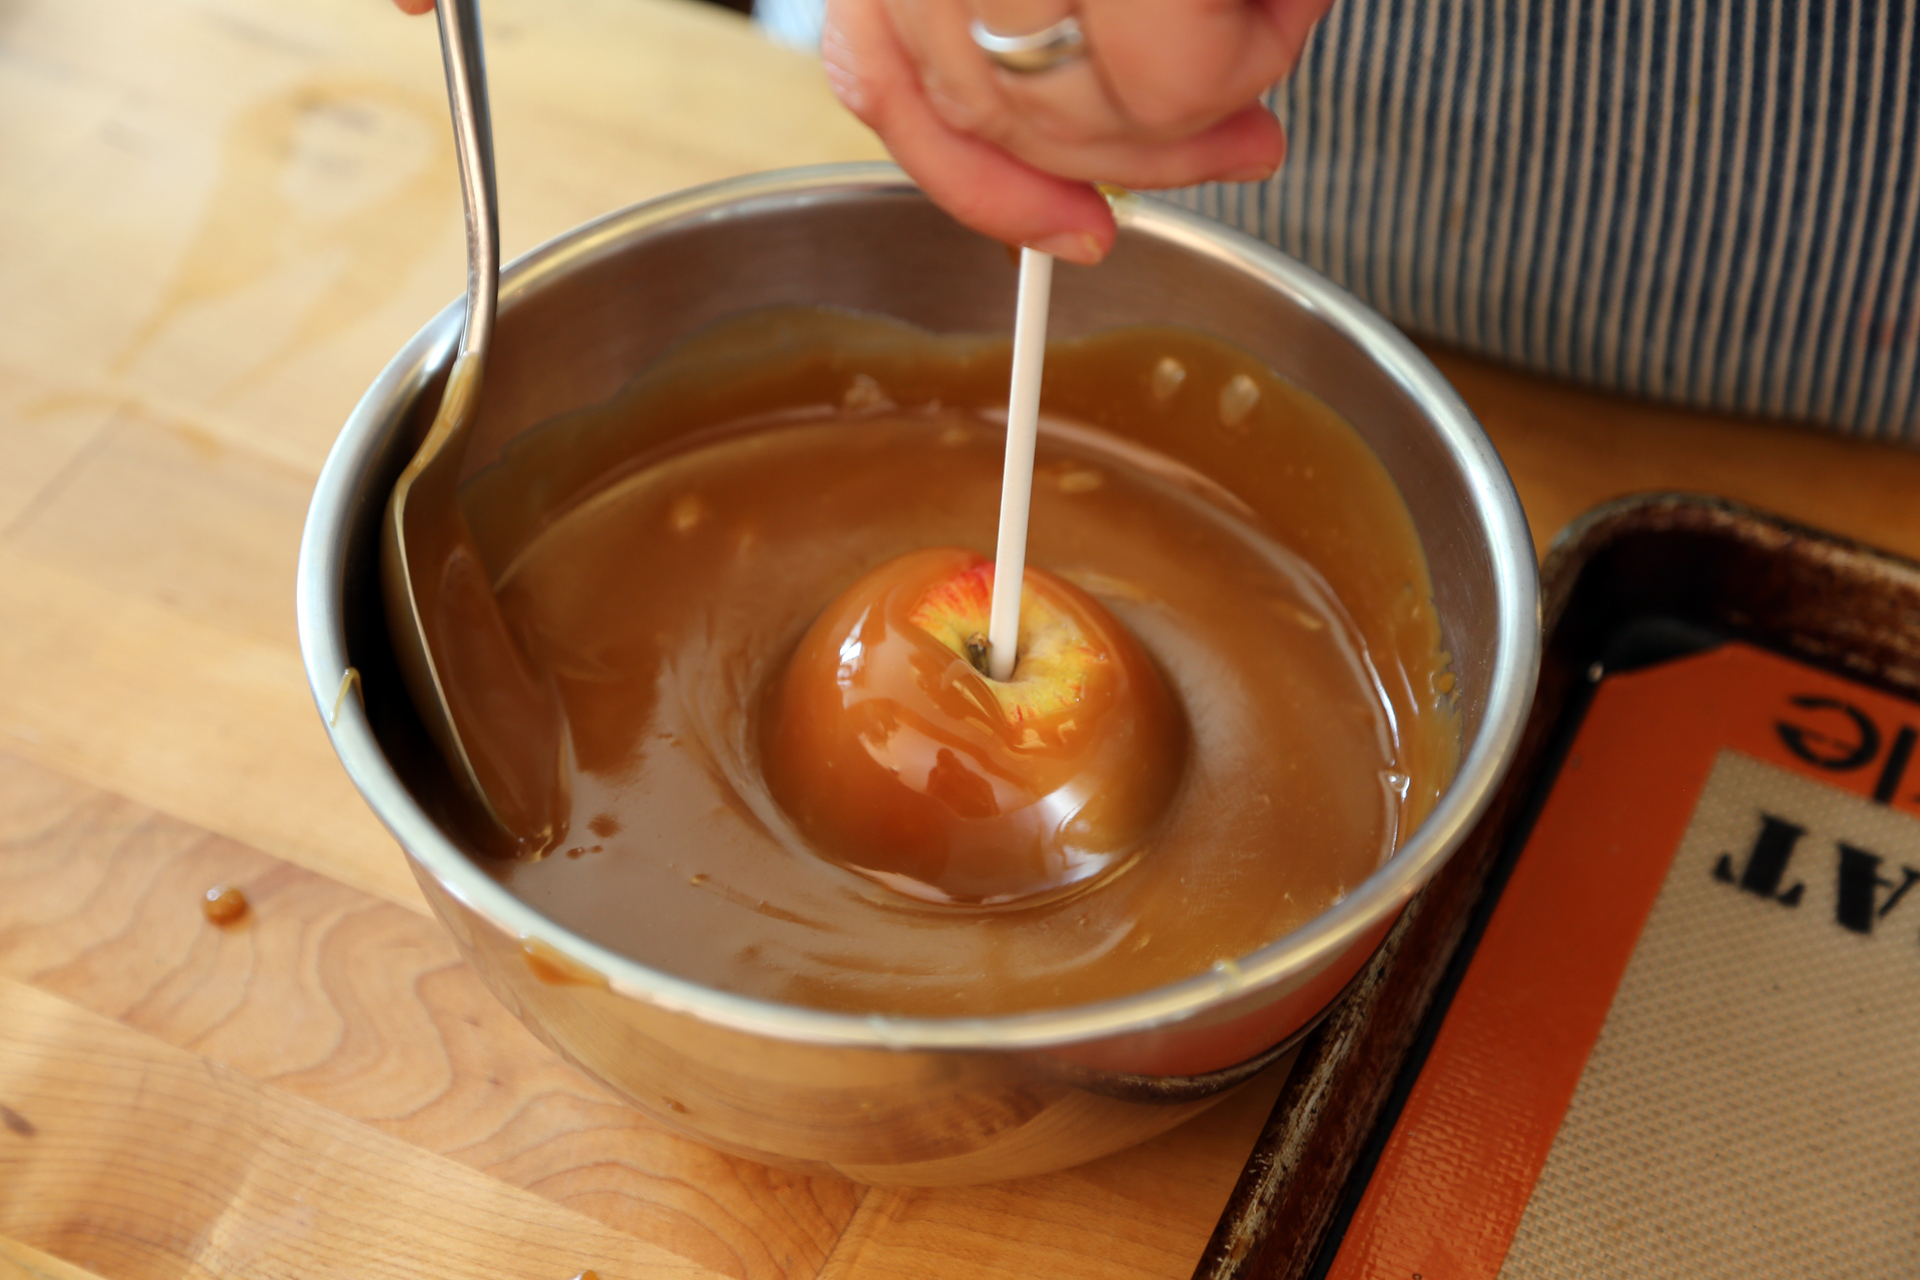 Grease the lined parchment or silicone. Holding the stick, dip each apple into the caramel.